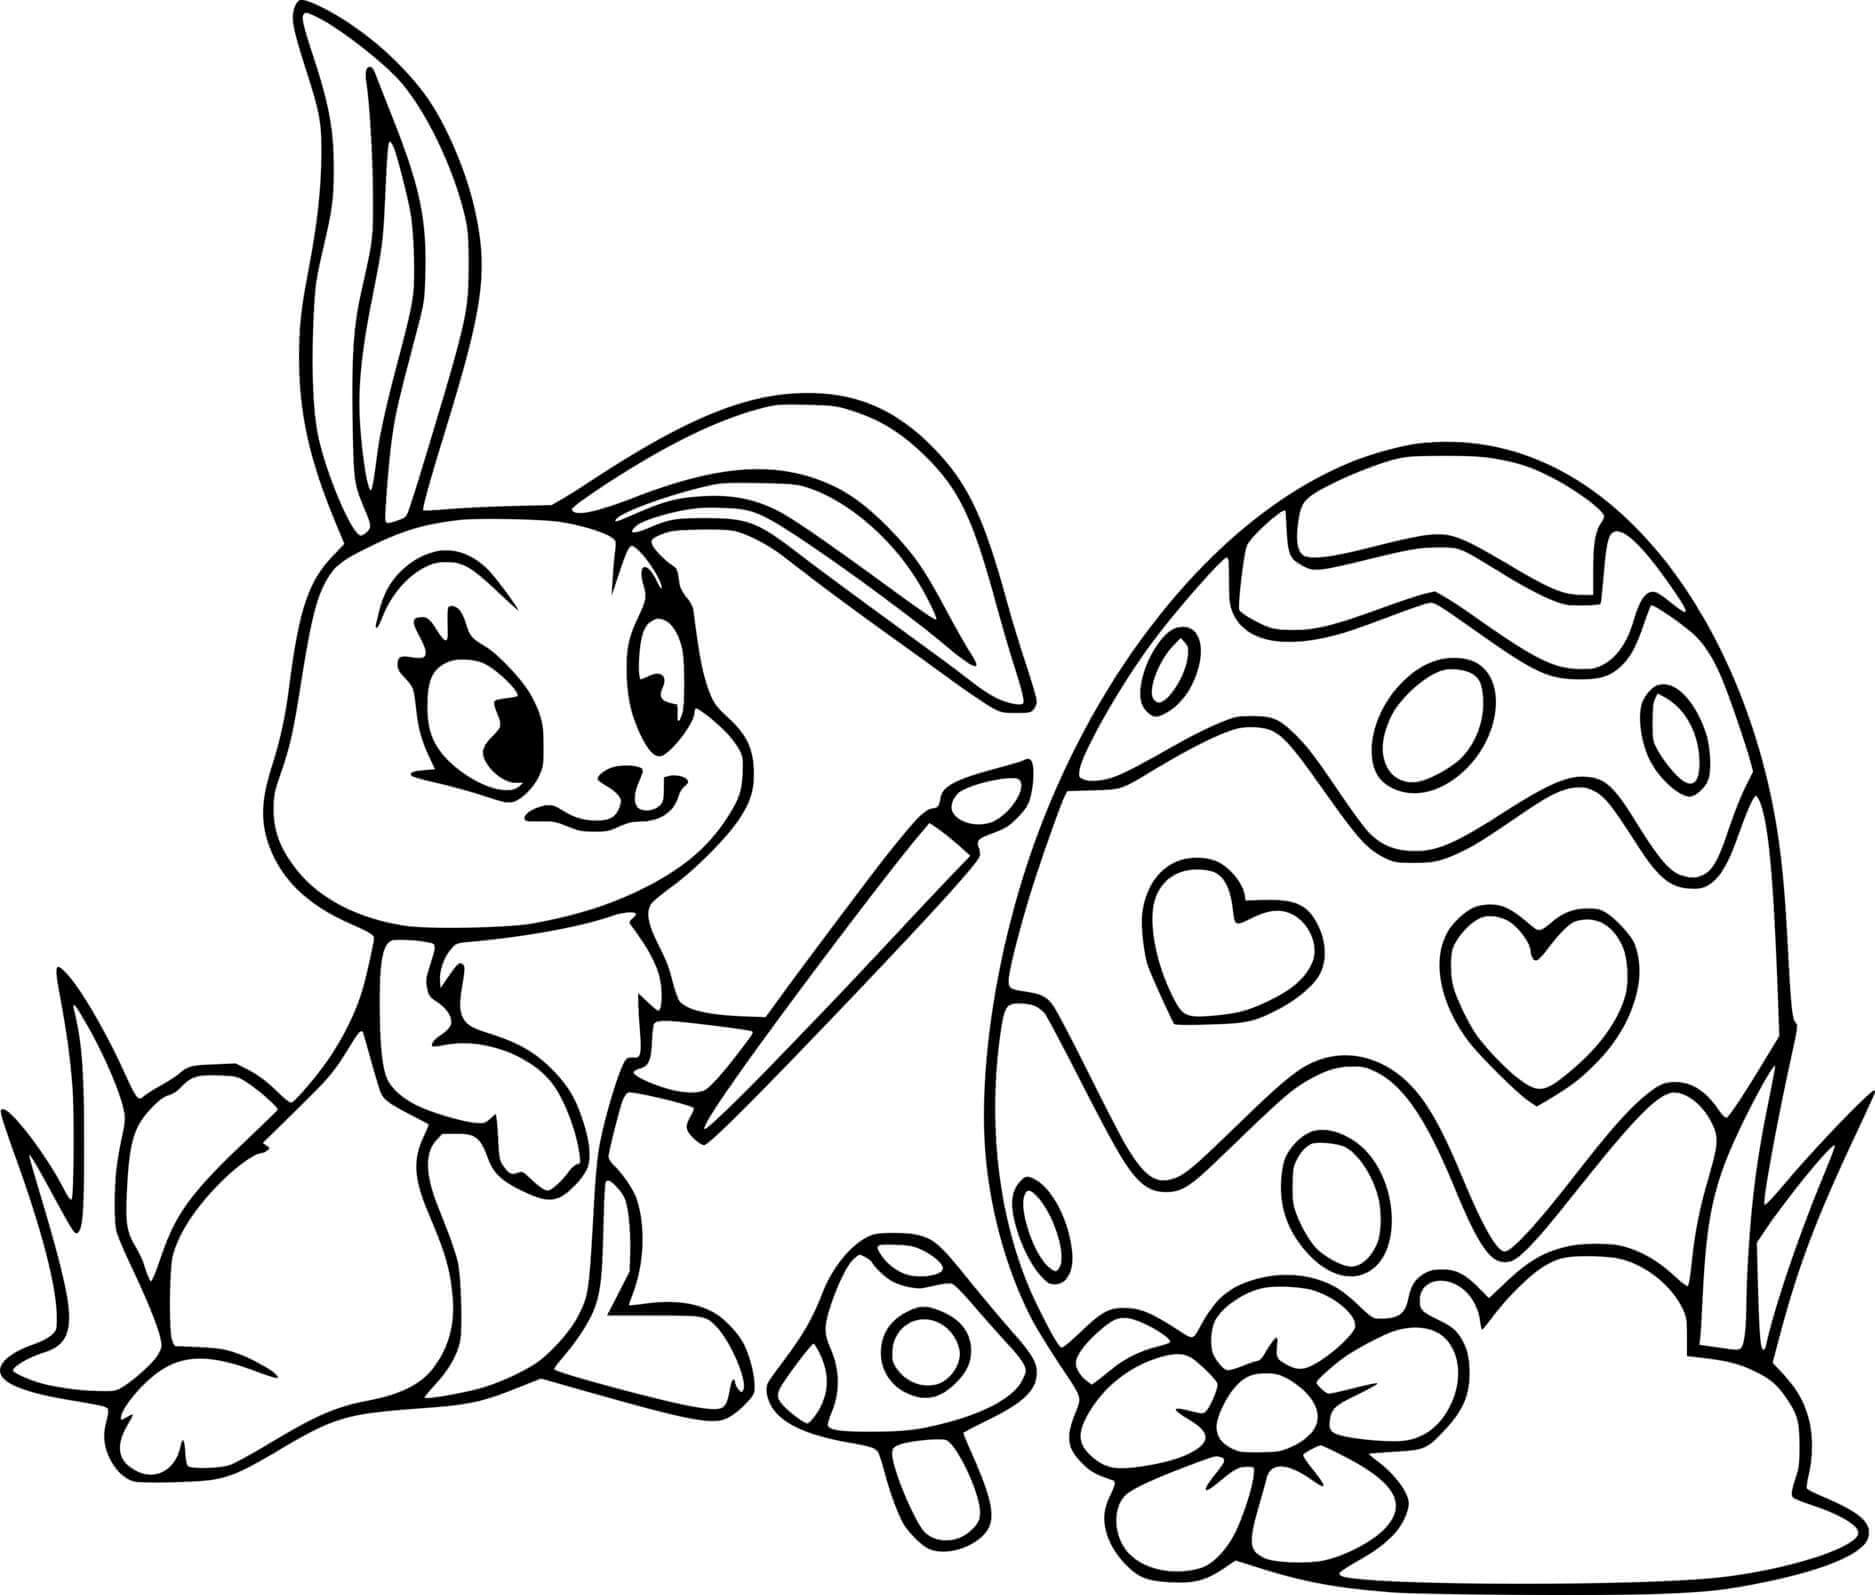 Cute Easter Bunny Painting The Egg Coloring Page